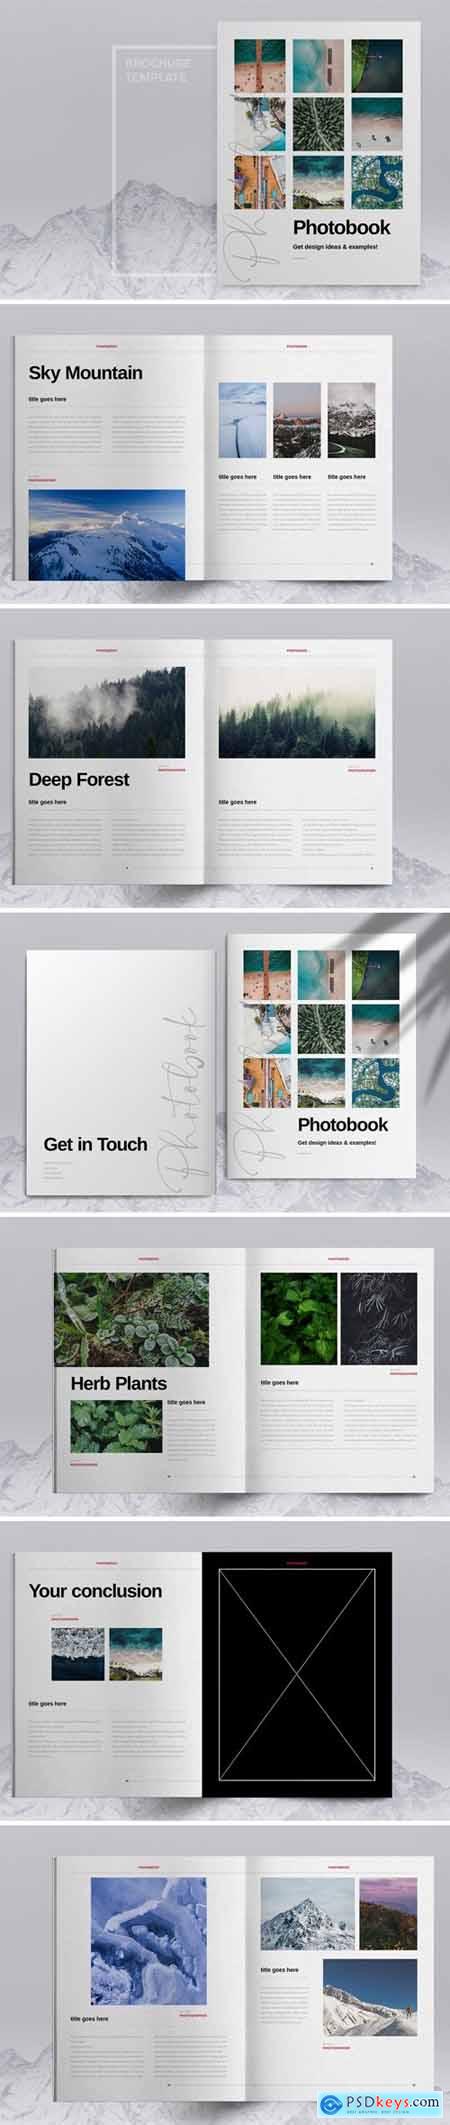 Colorful Photobook Template